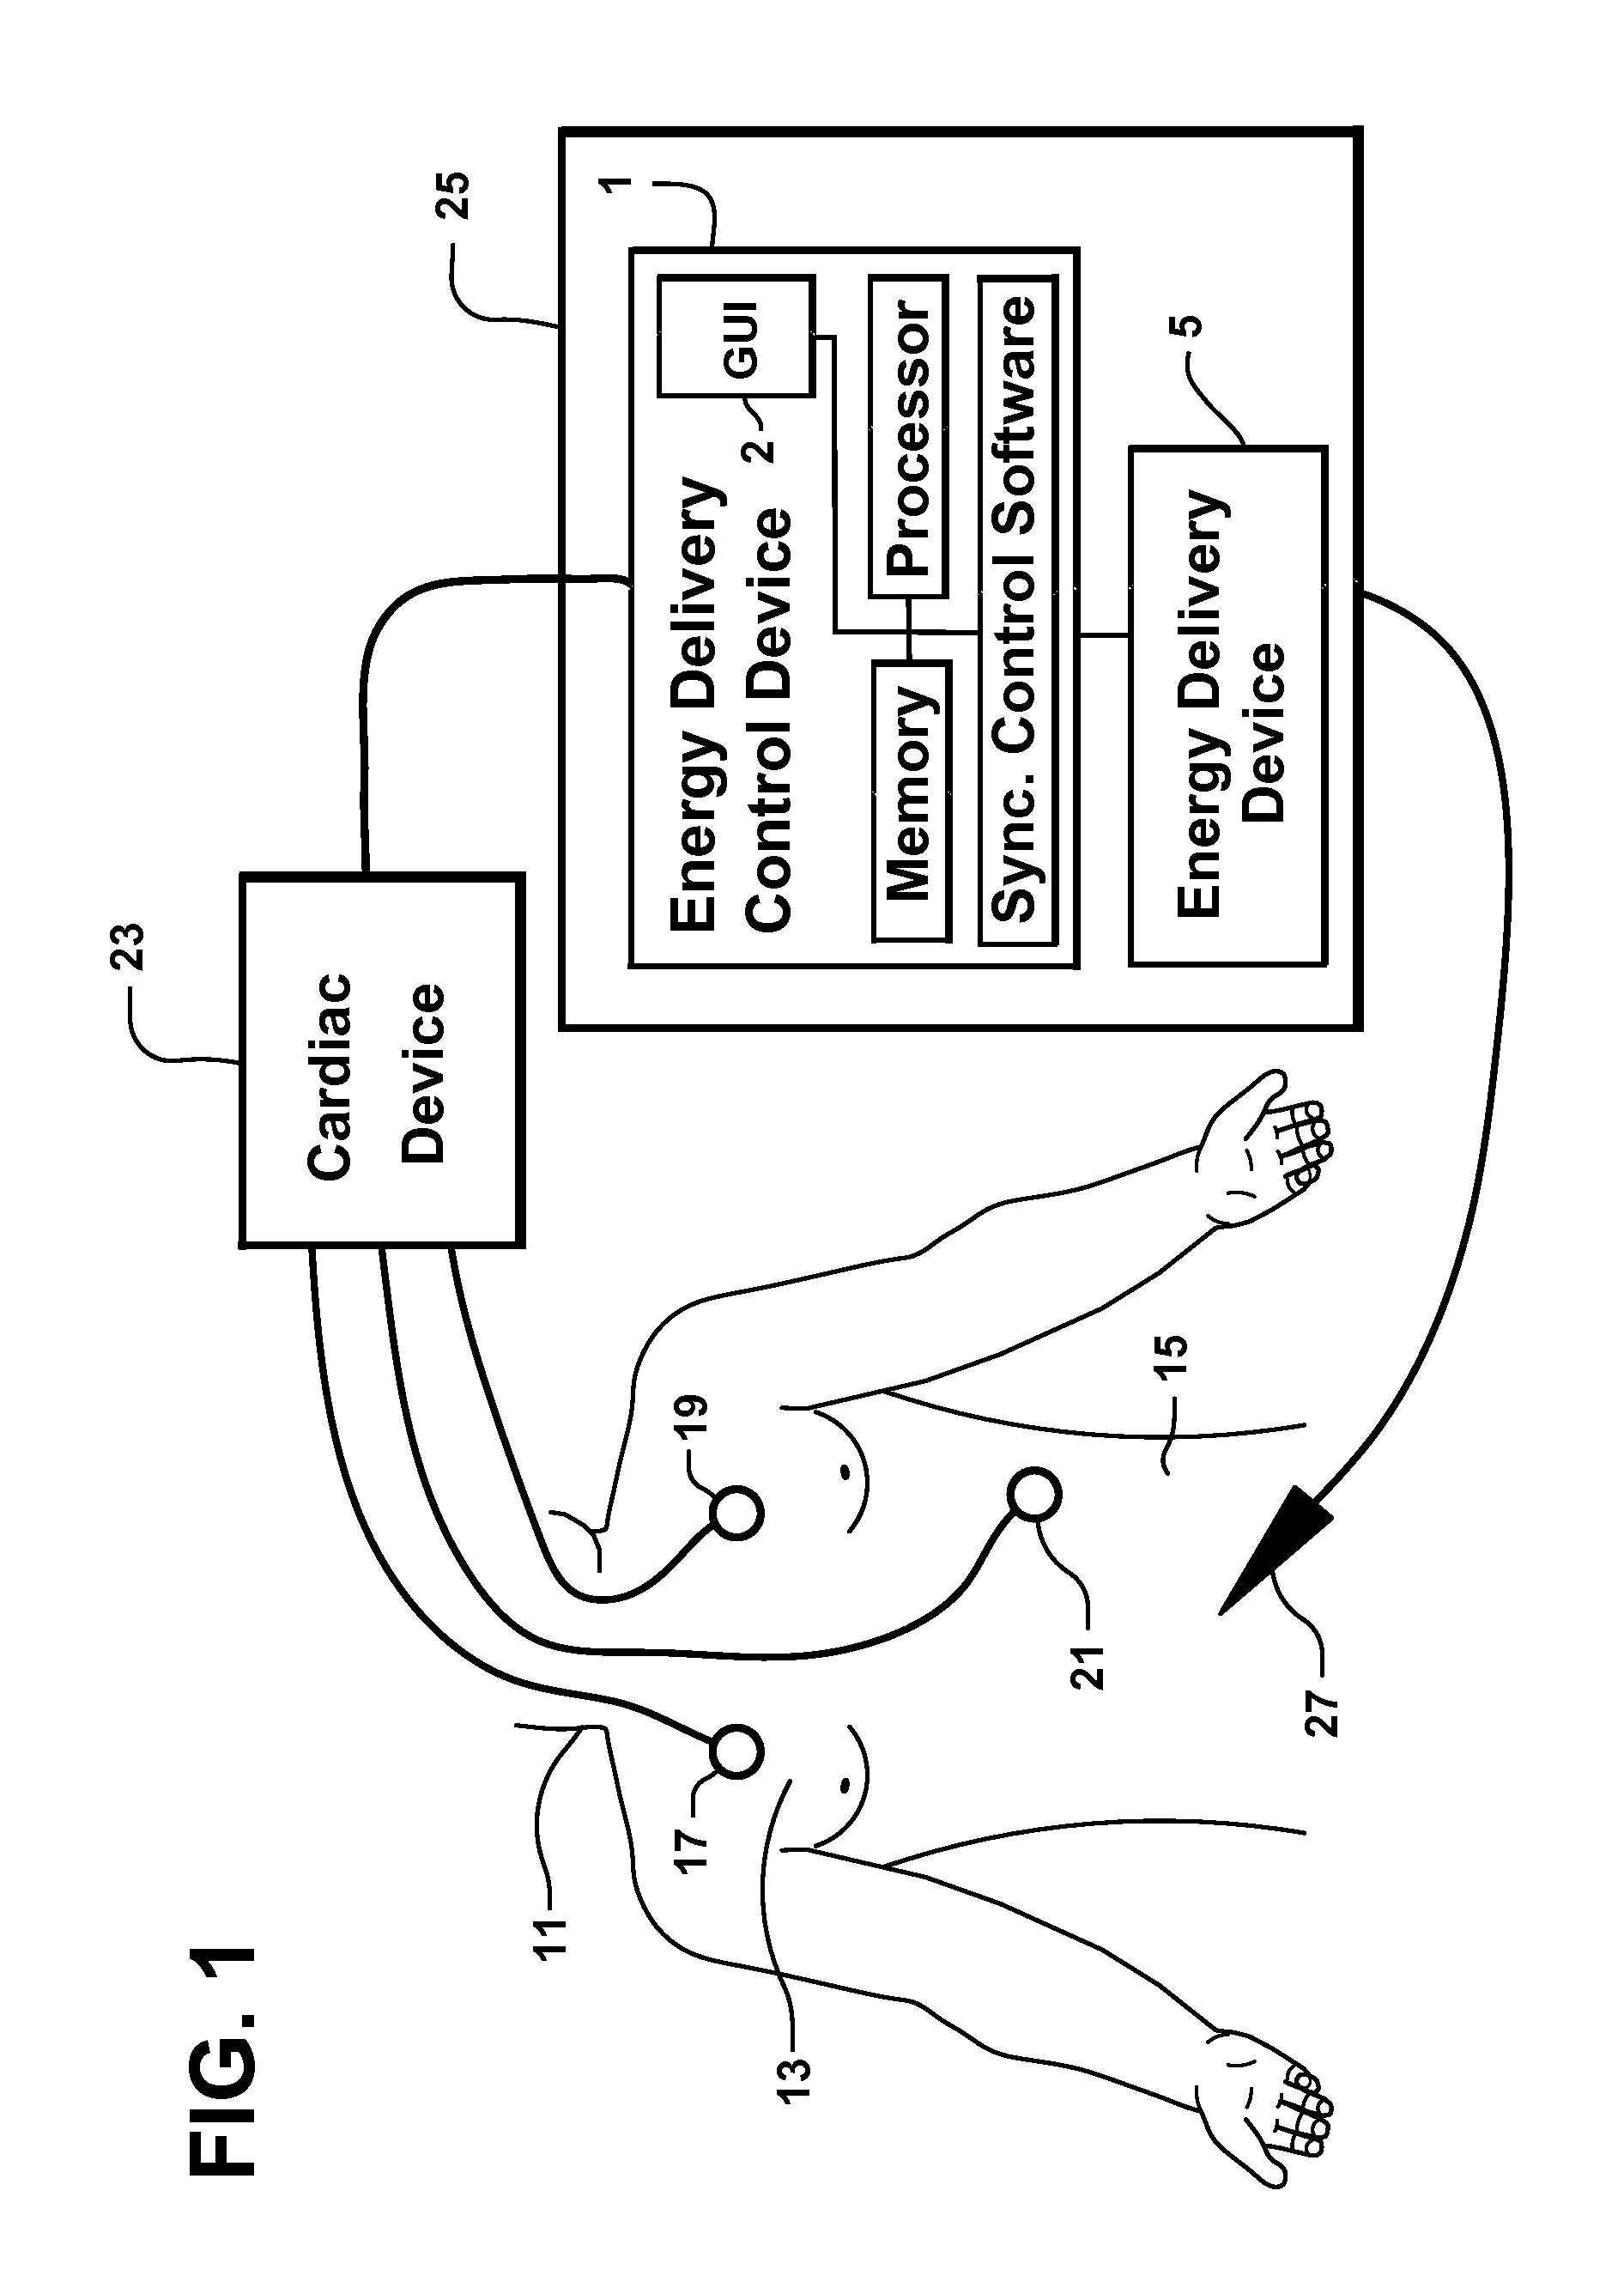 System and method for synchronizing energy delivery to the cardiac rhythm